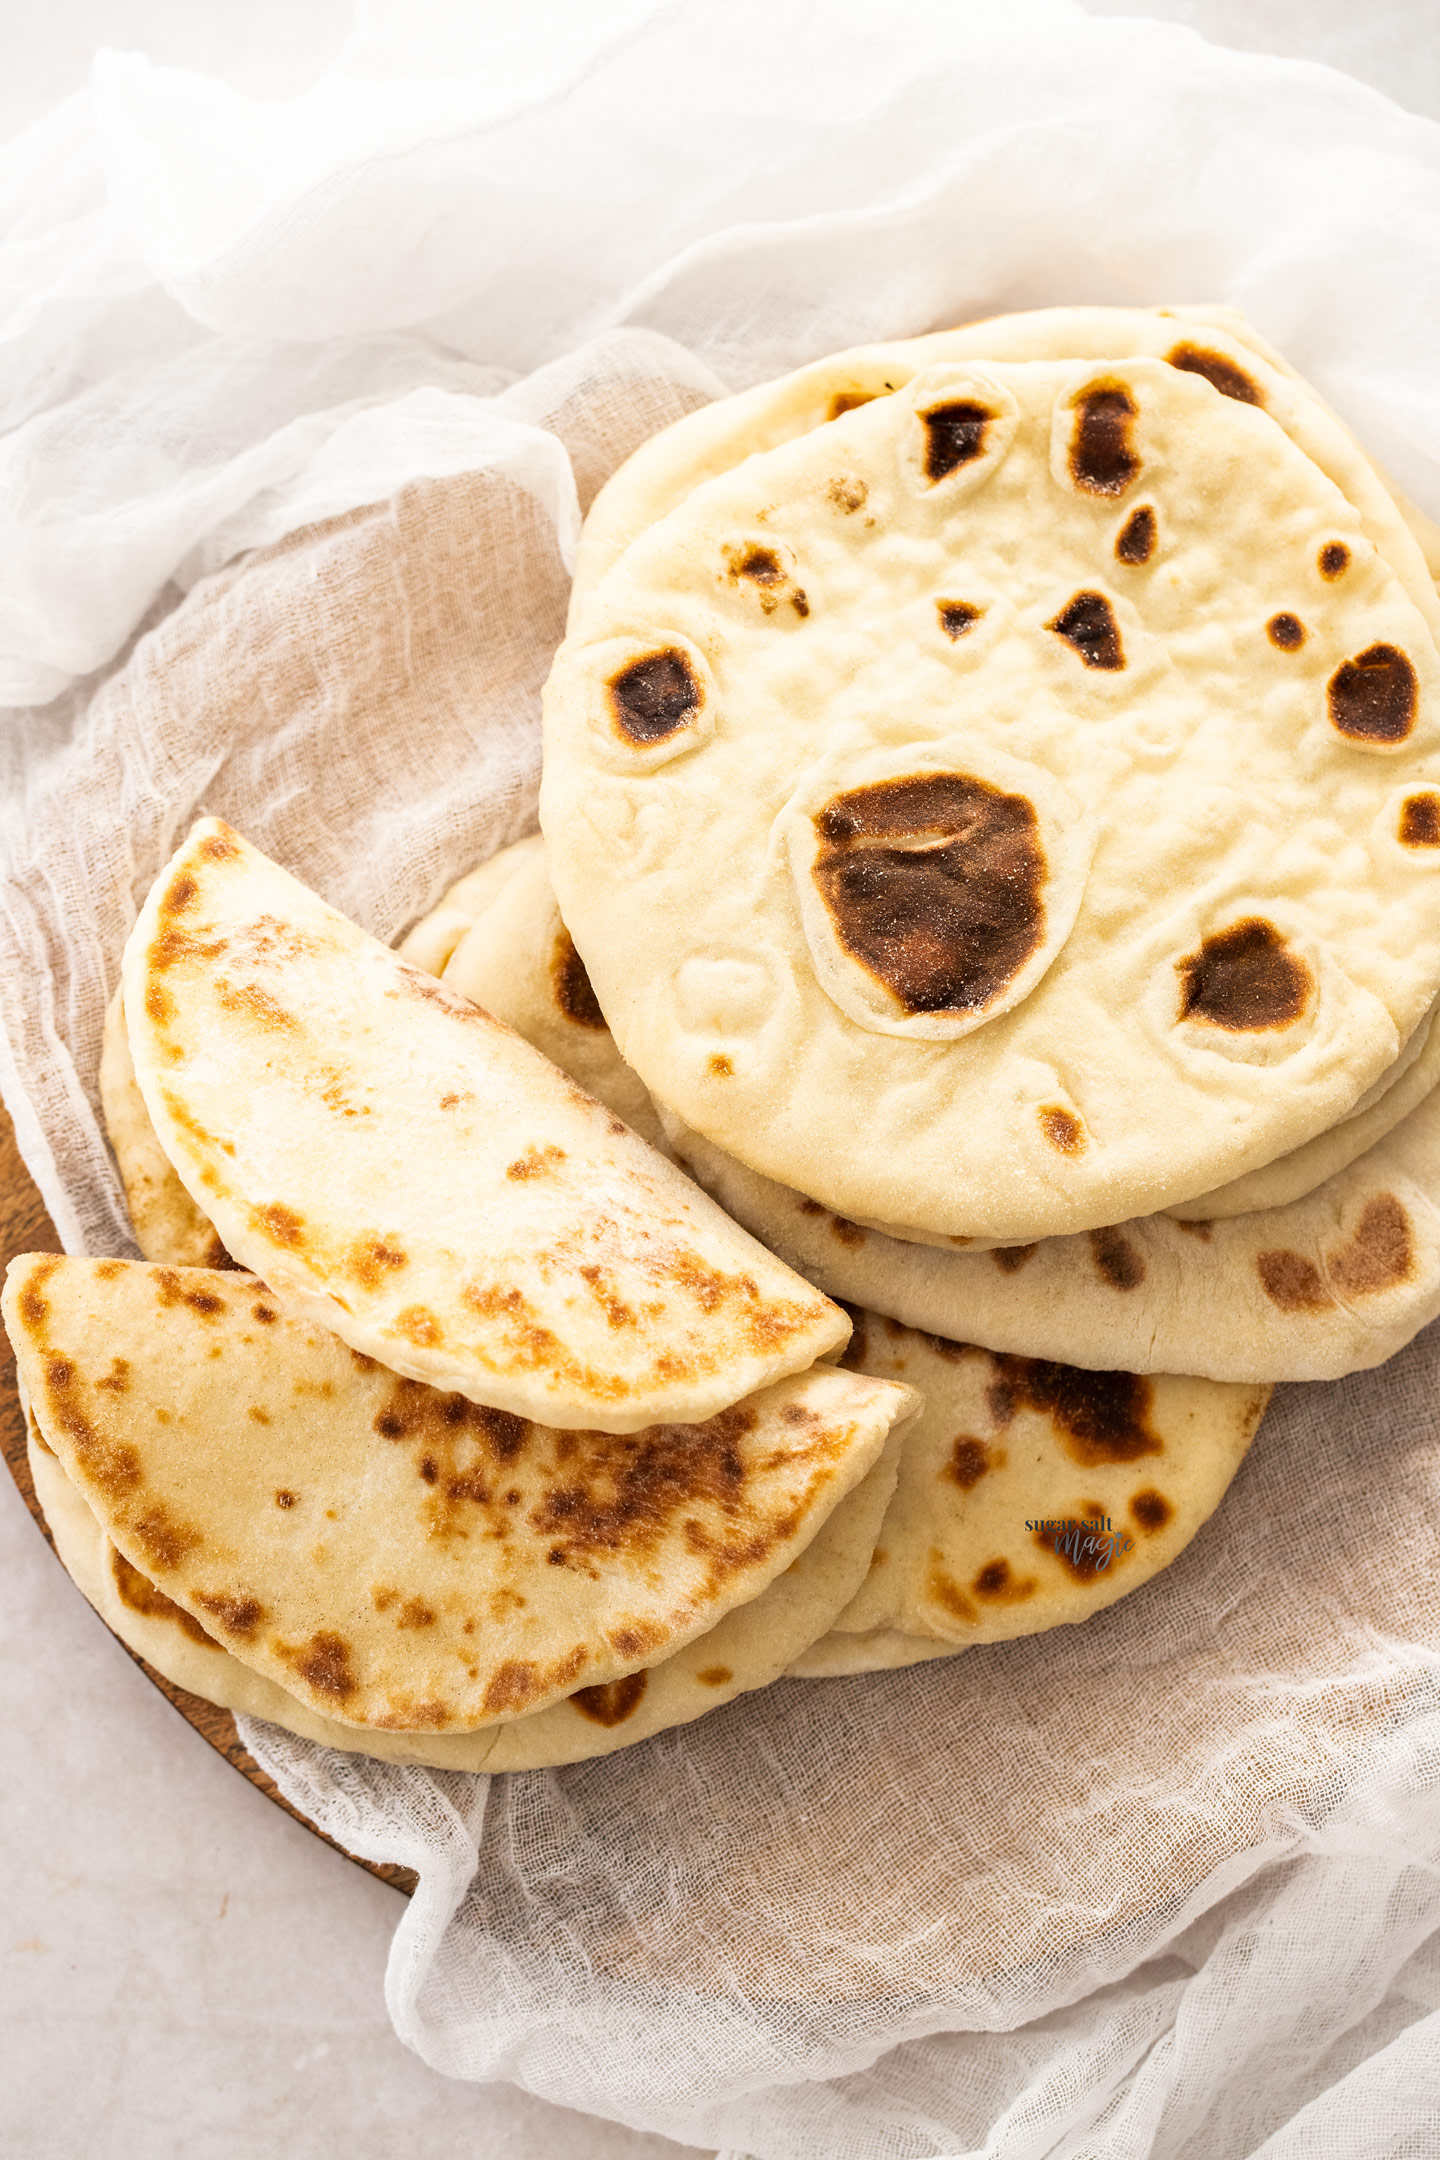 Top down view of flatbreads, some folded to show pliability.